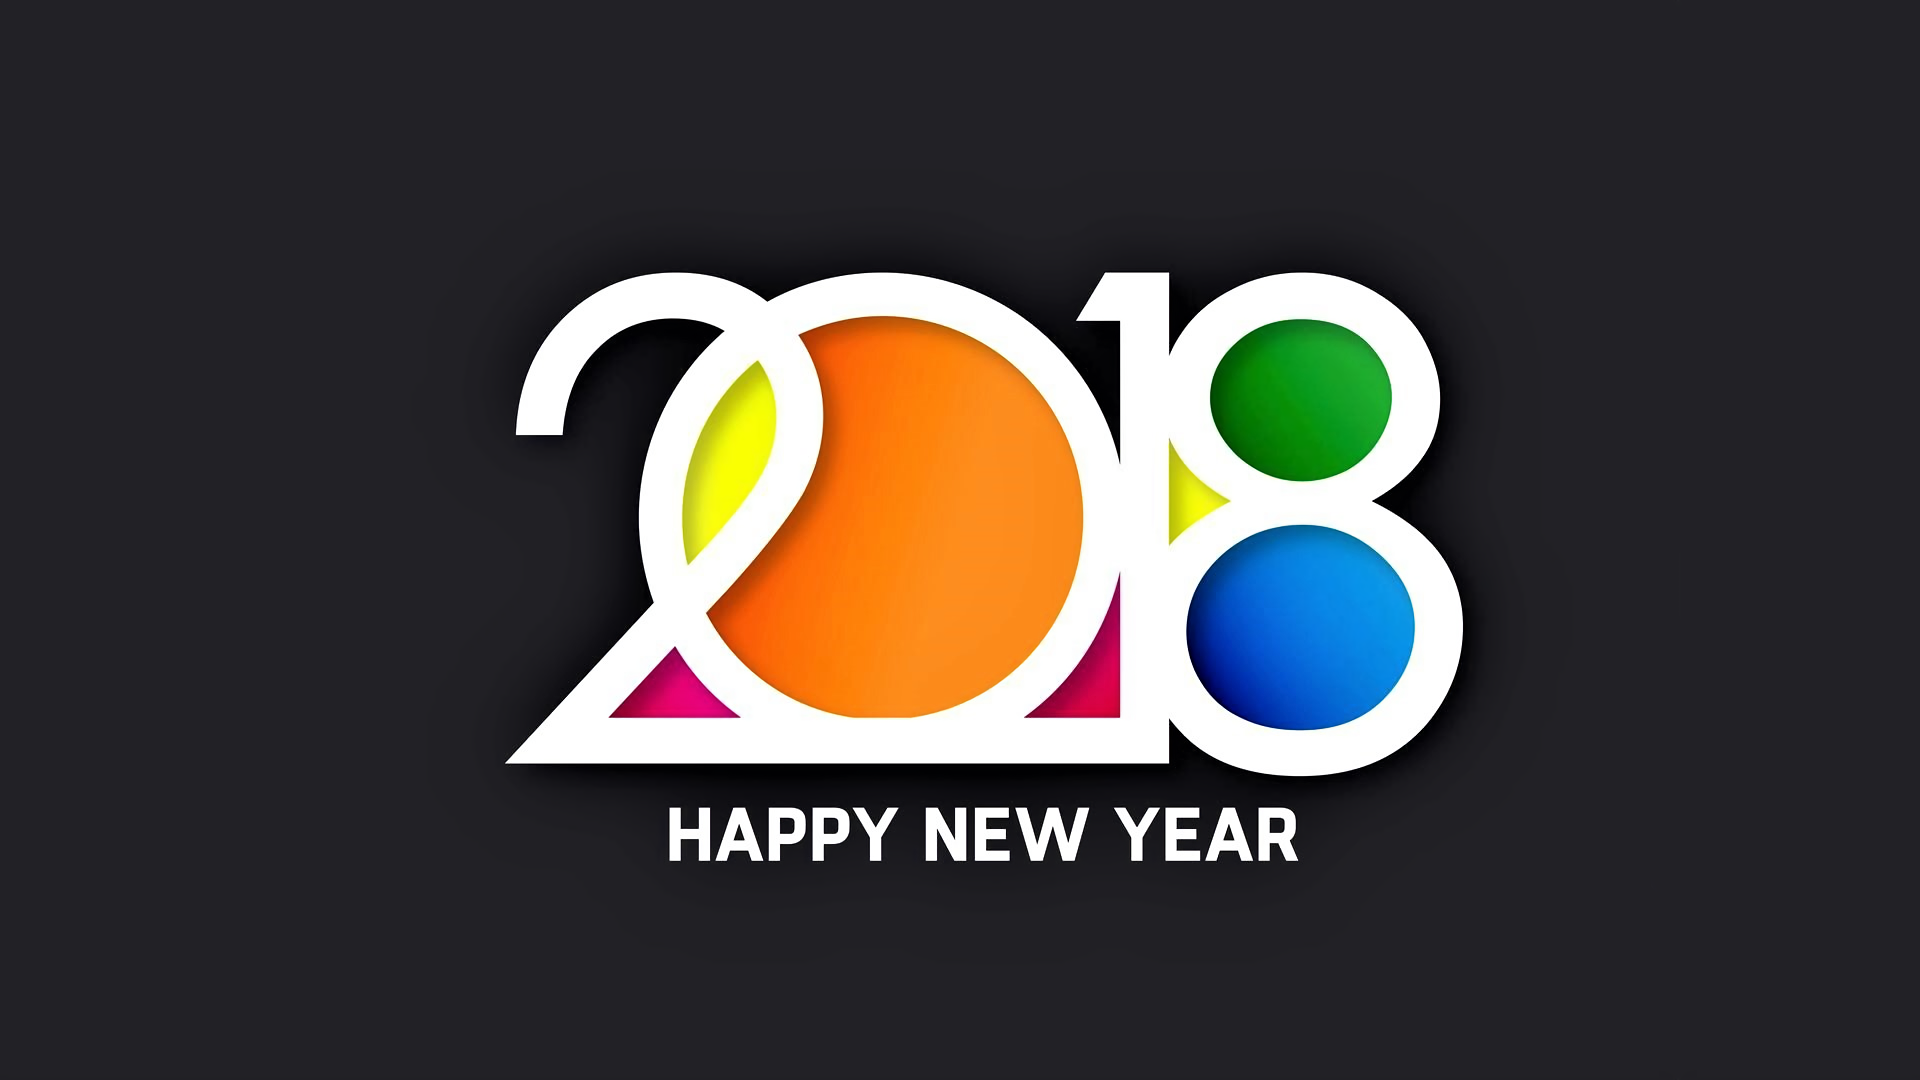 happy new year 2018 wallpapers,logo,text,graphics,graphic design,brand